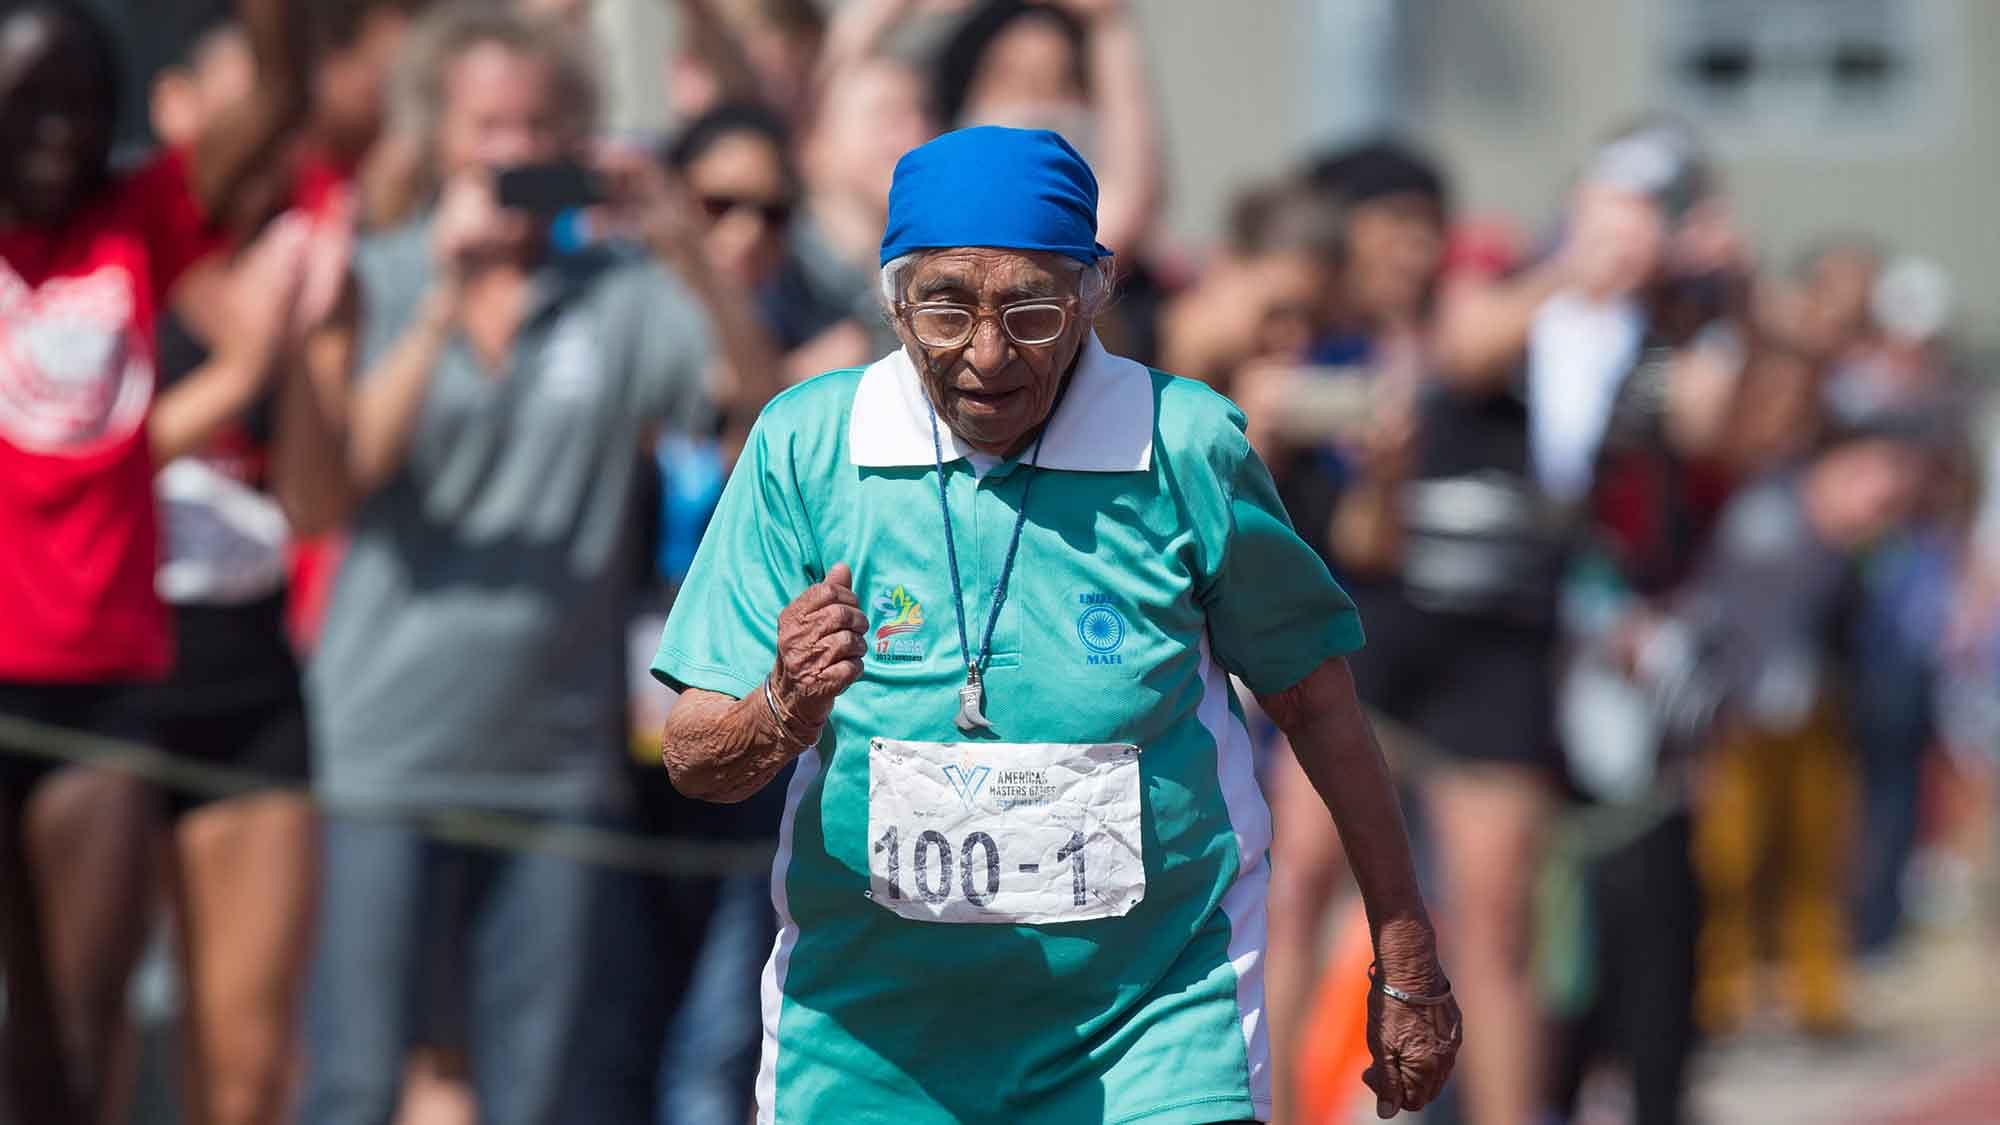 Man Kaur competes in the 100-meter track and field event at the Americas Masters Games in Vancouver. (Photo: AP)